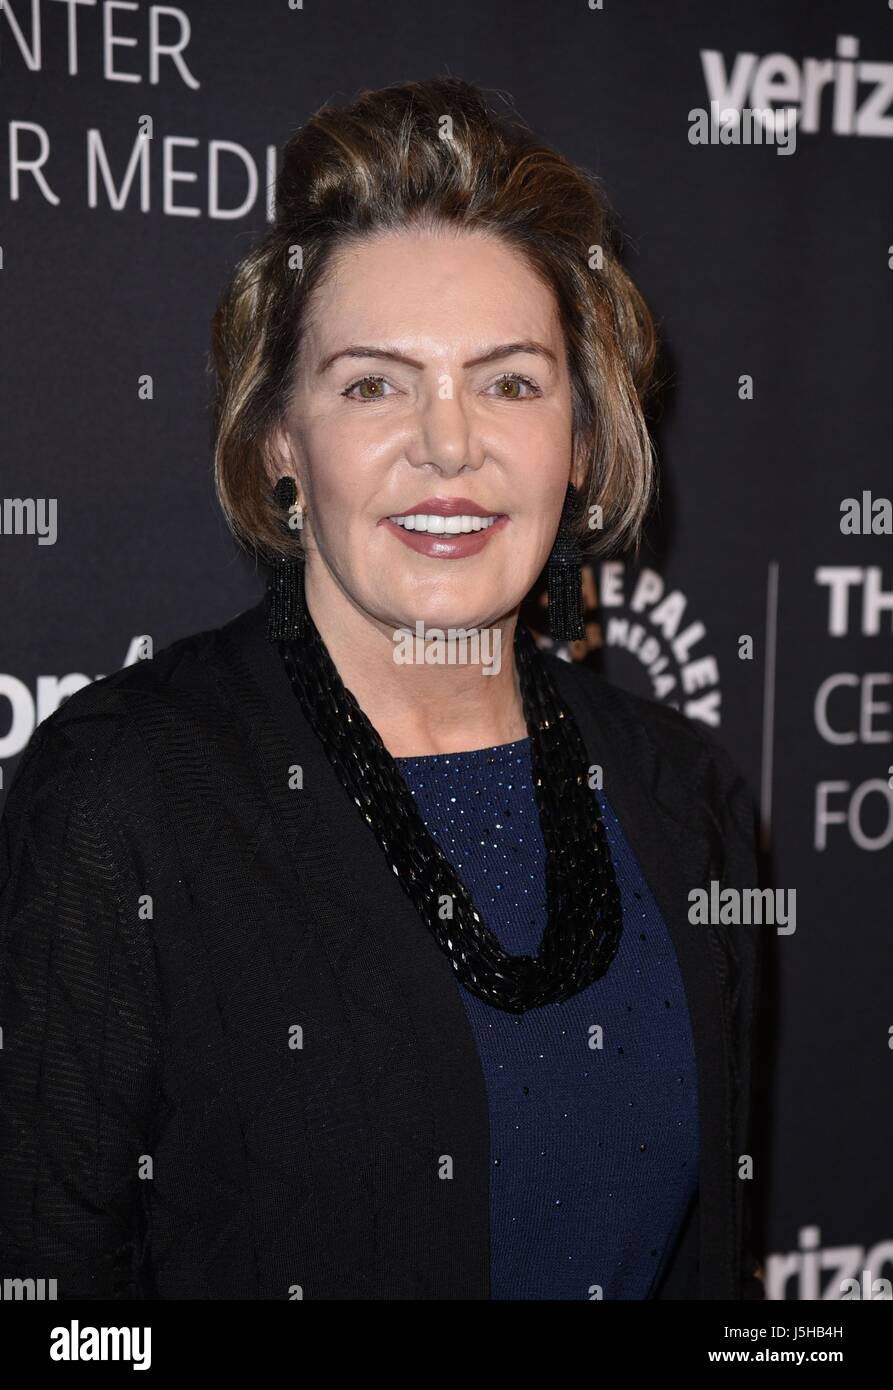 New York, NY, USA. 17th May, 2017. Lesley Visser at arrivals for The Paley Honors: Celebrating Women in Television, Cipriani Wall Street, New York, NY May 17, 2017. Credit: Derek Storm/Everett Collection/Alamy Live News Stock Photo